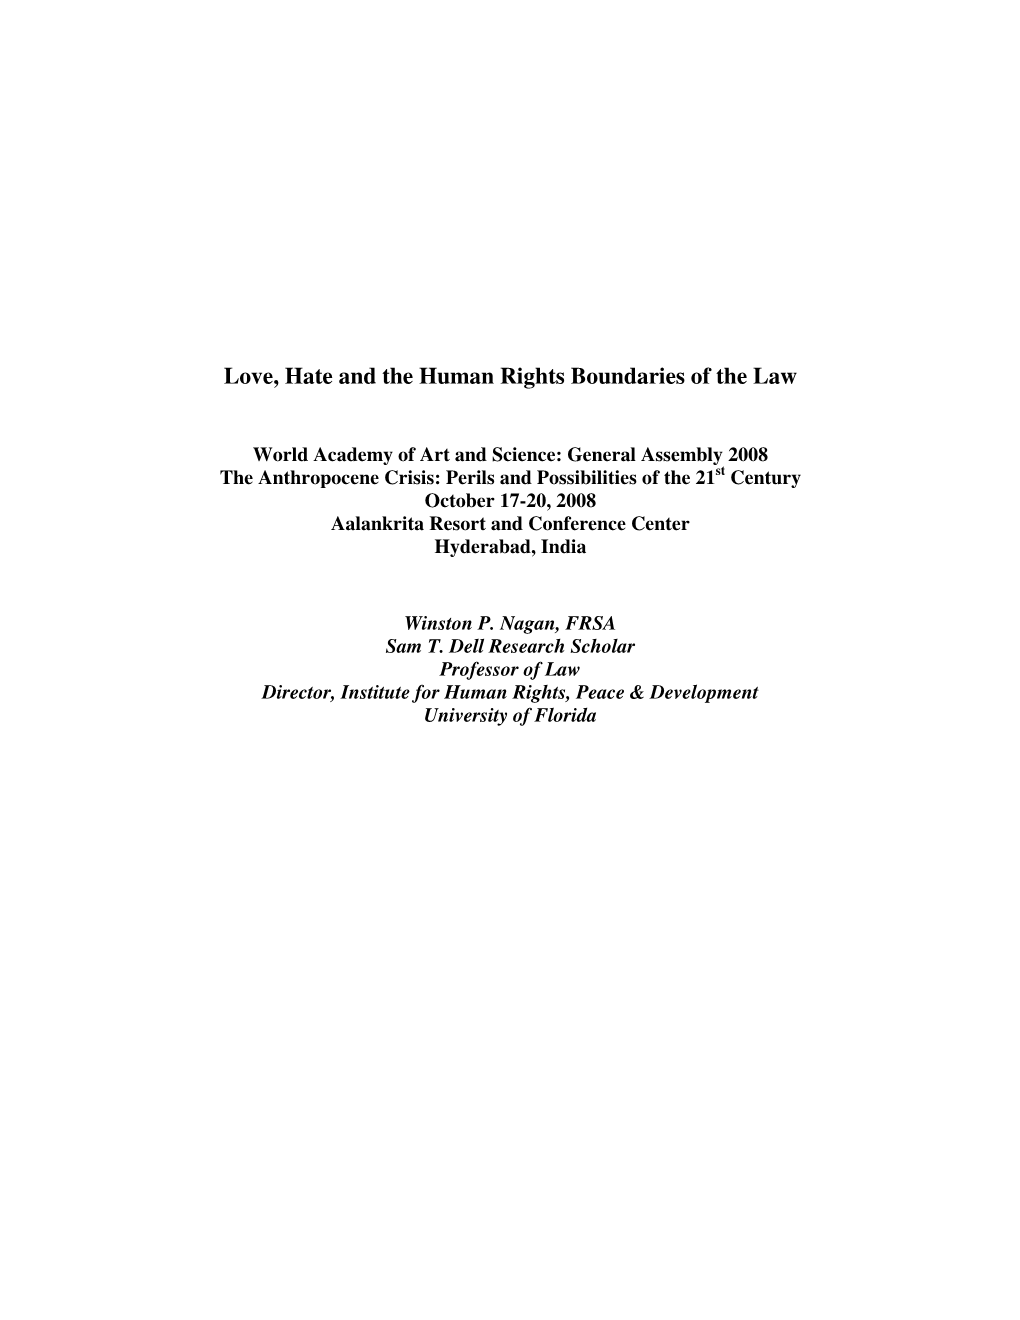 Love, Hate and the Human Rights Boundaries of the Law